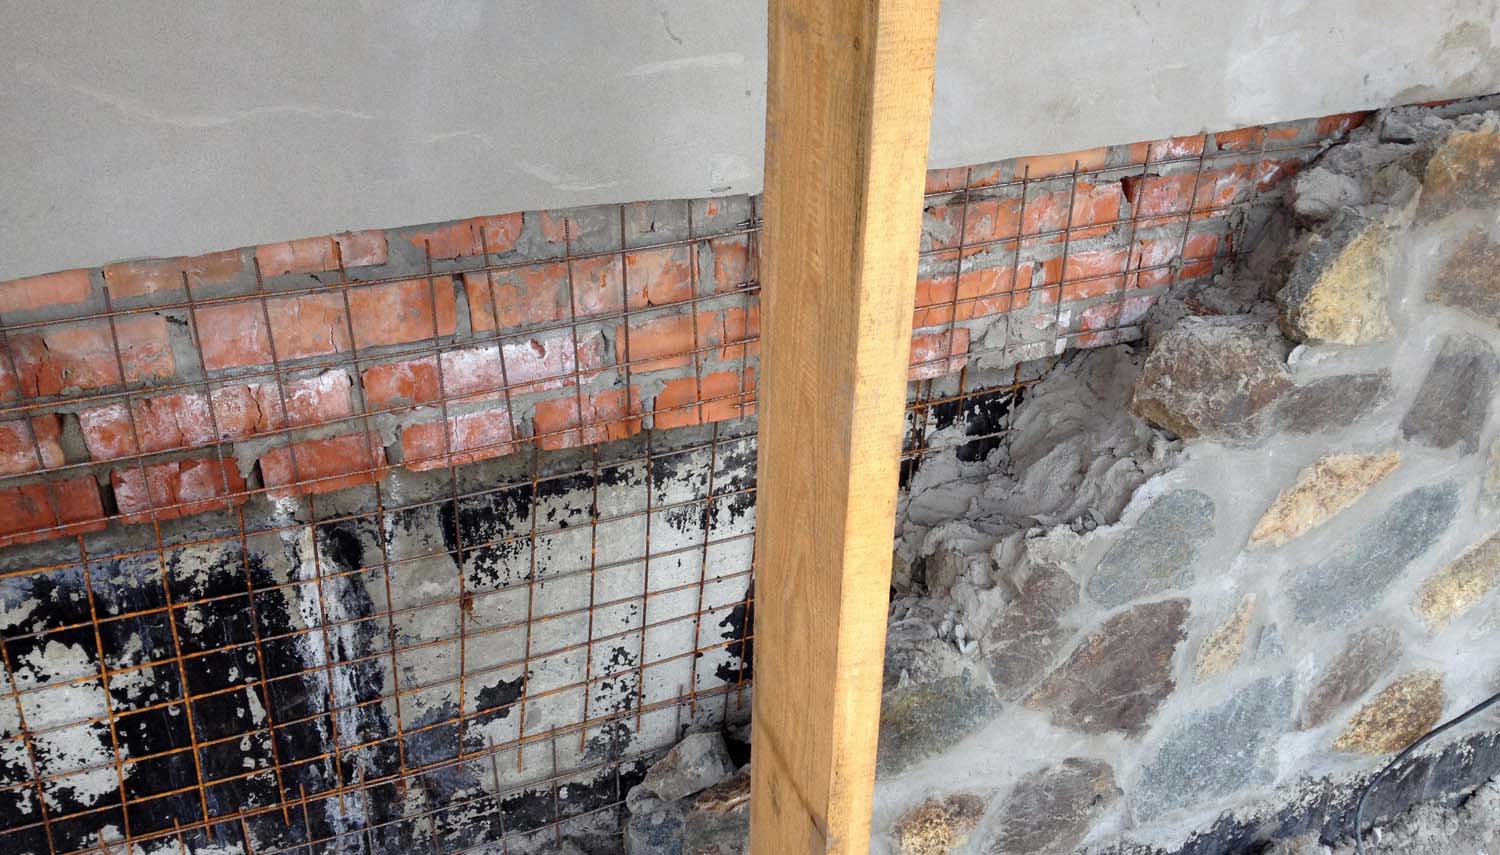 foundation of a home is ready for repair bricks and framing shown here